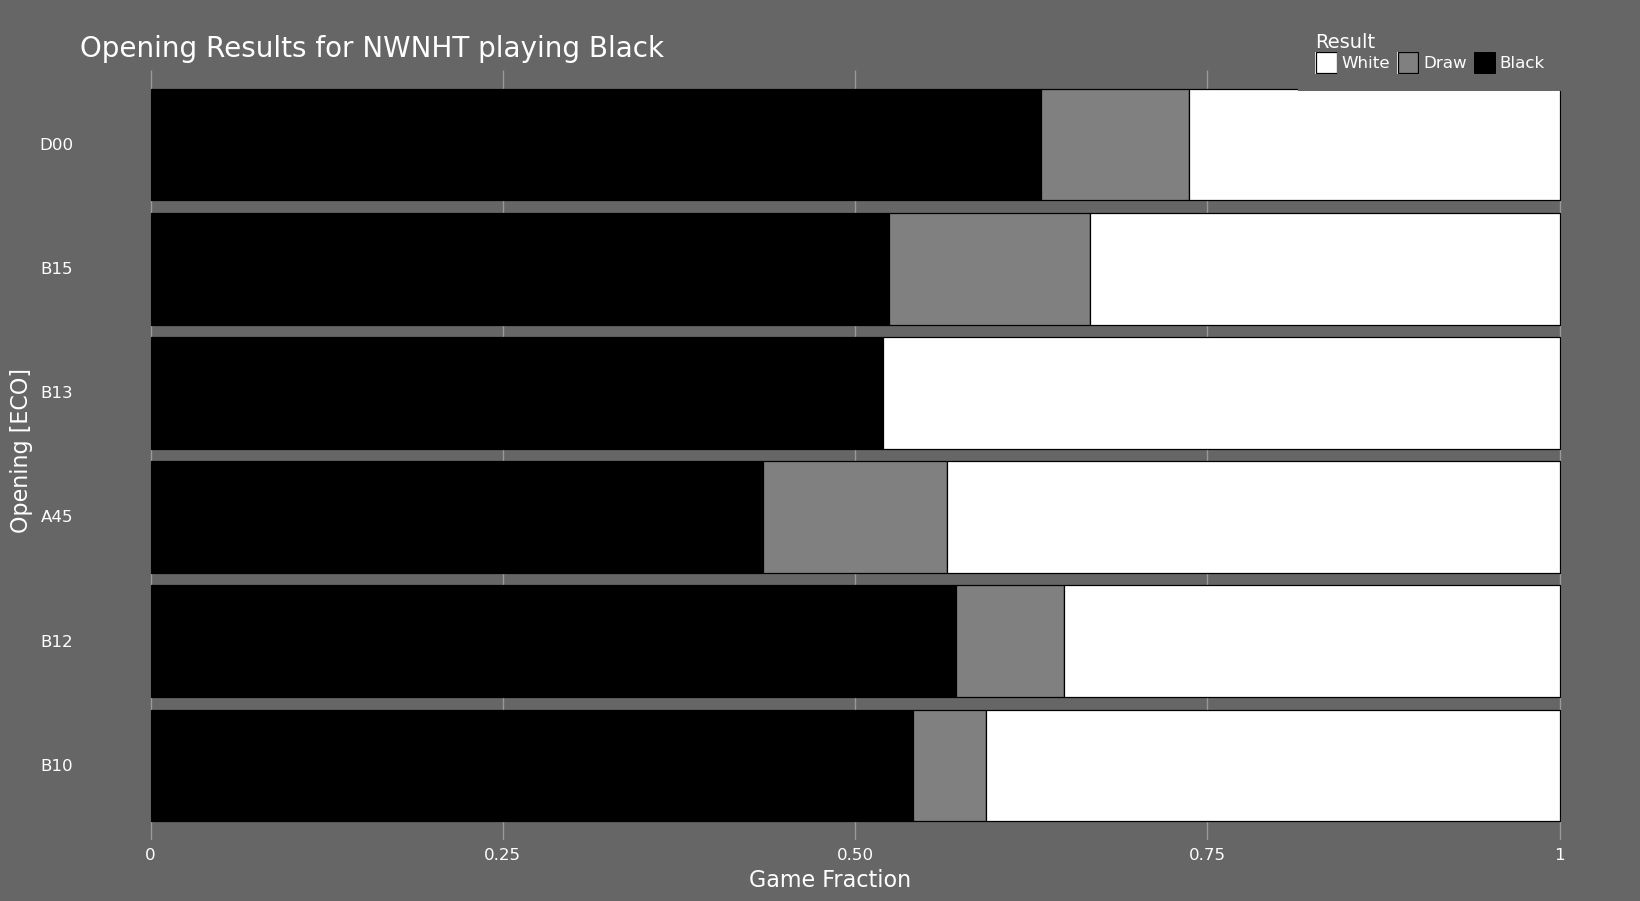 NWNHT Top Openings with black